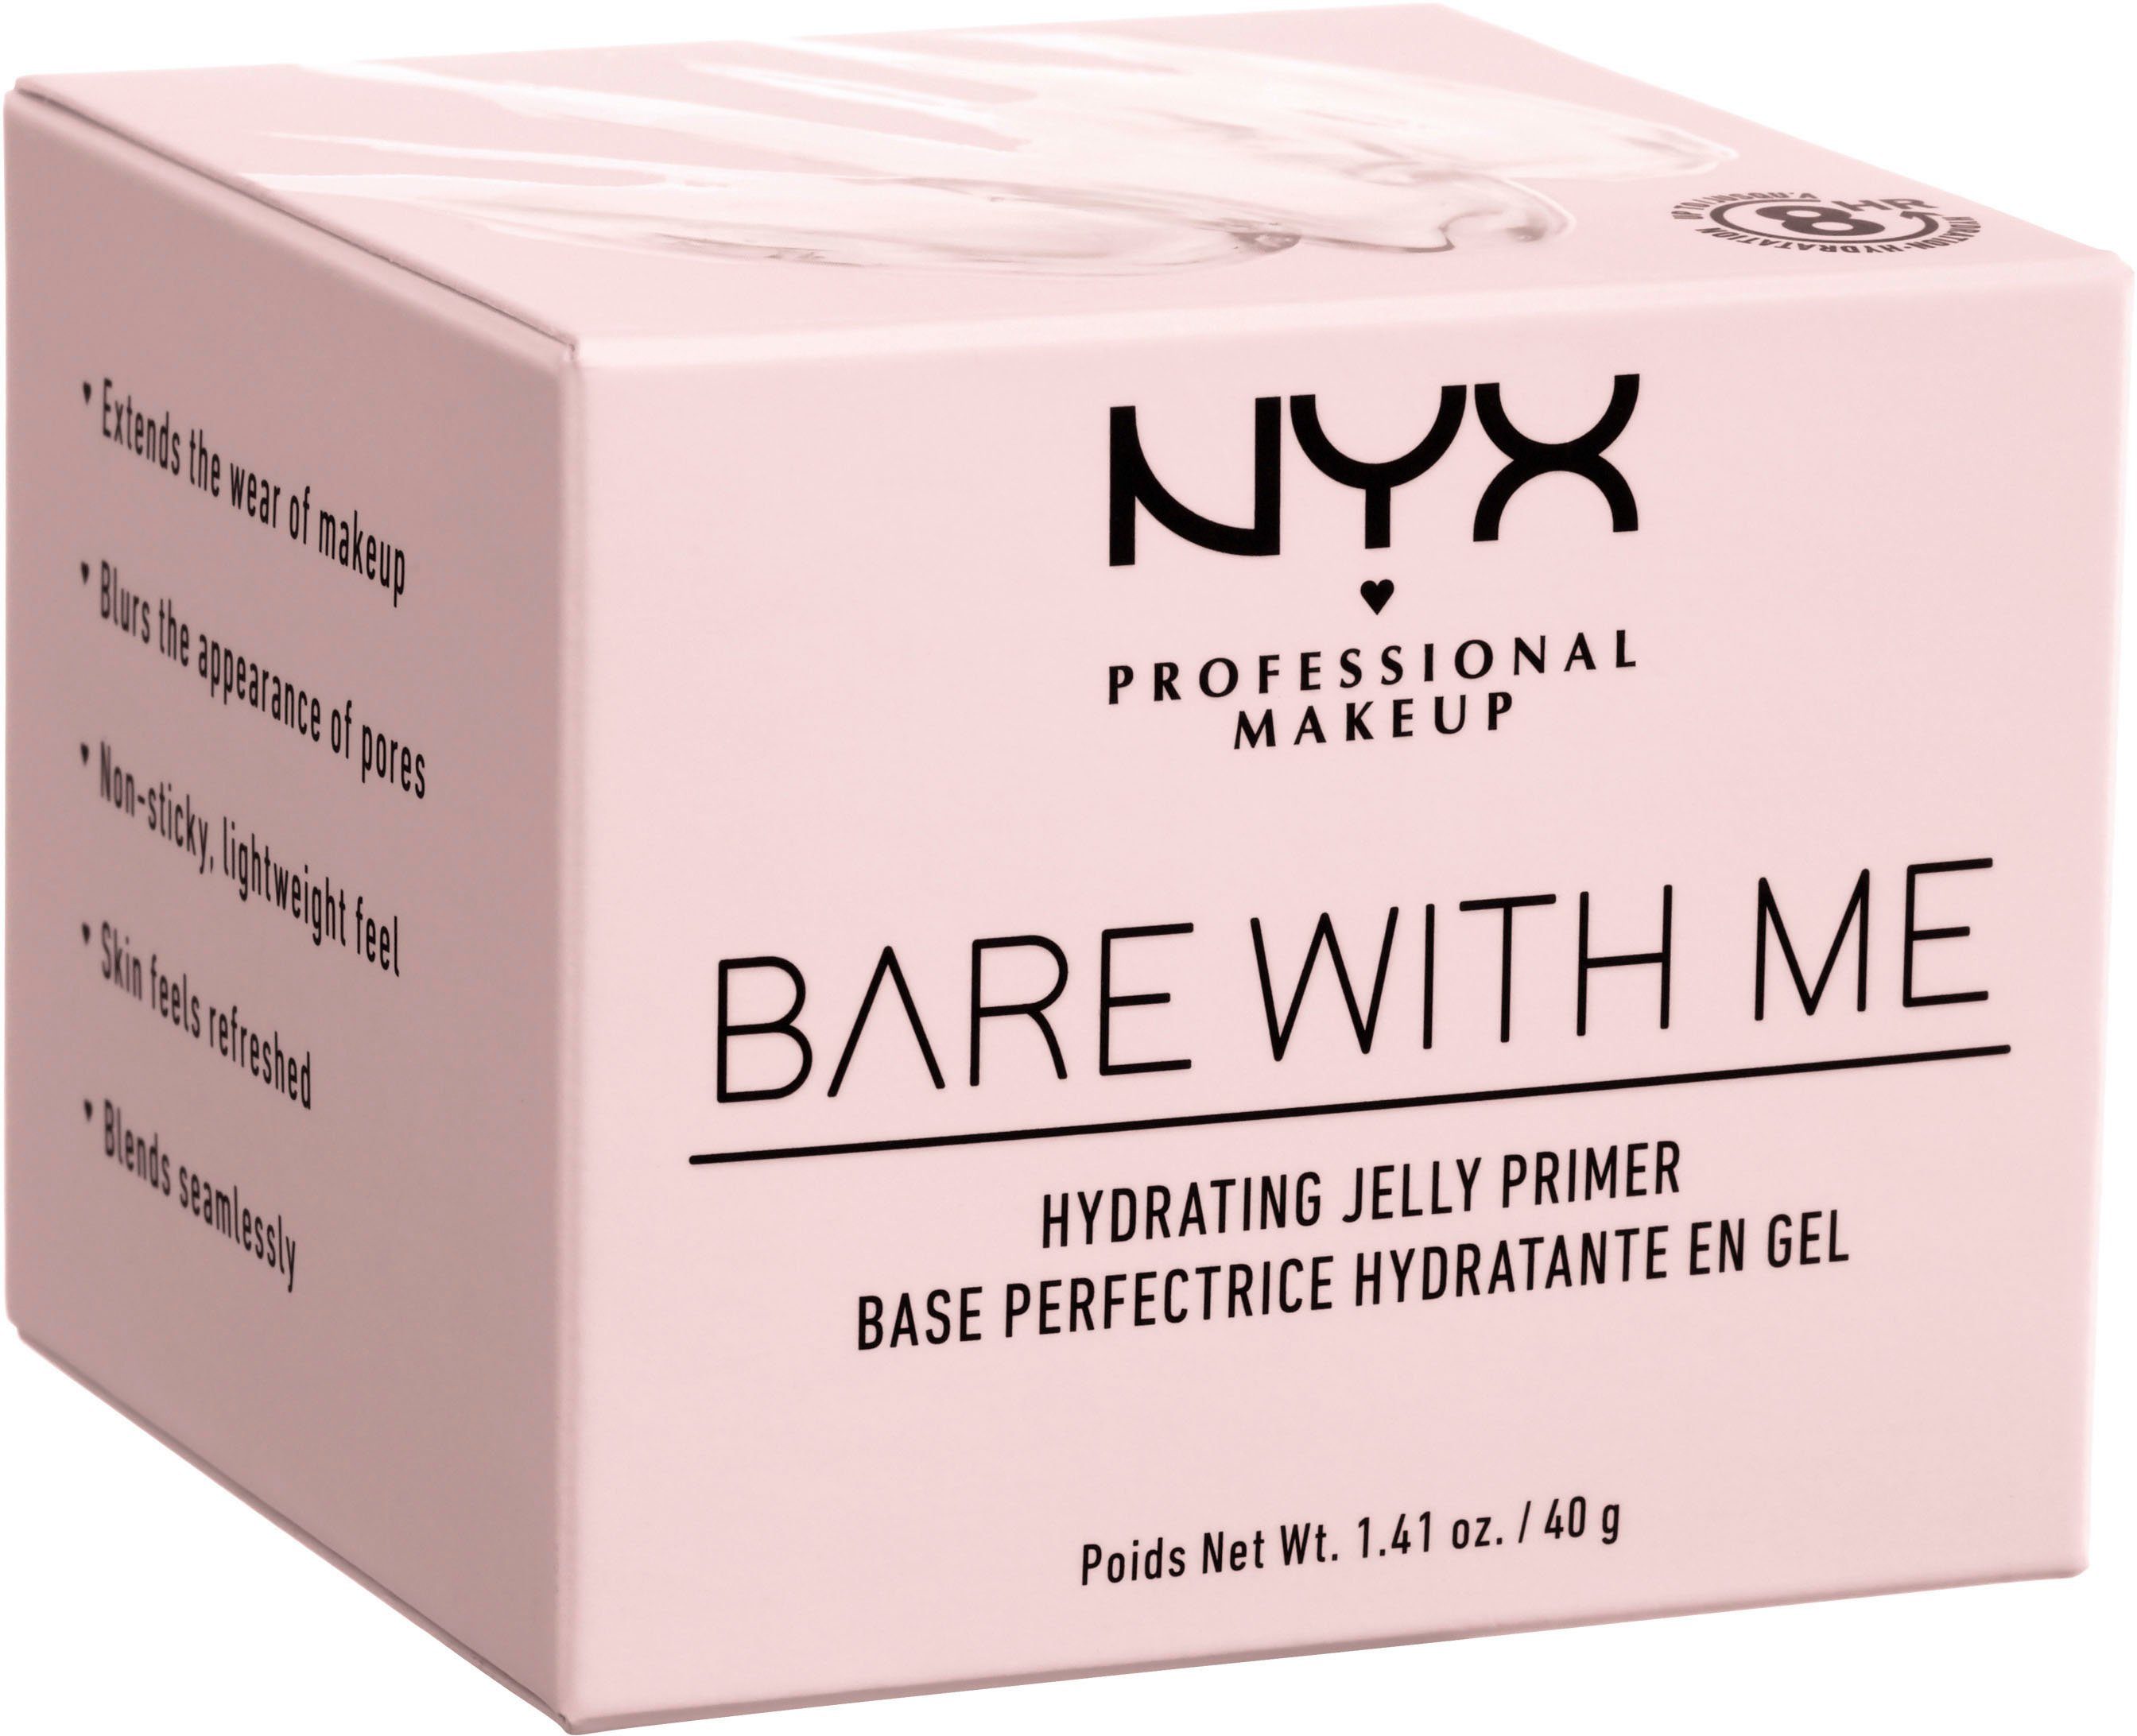 With Jelly NYX Makeup Me Primer Bare Primer Professional Hydrating NYX